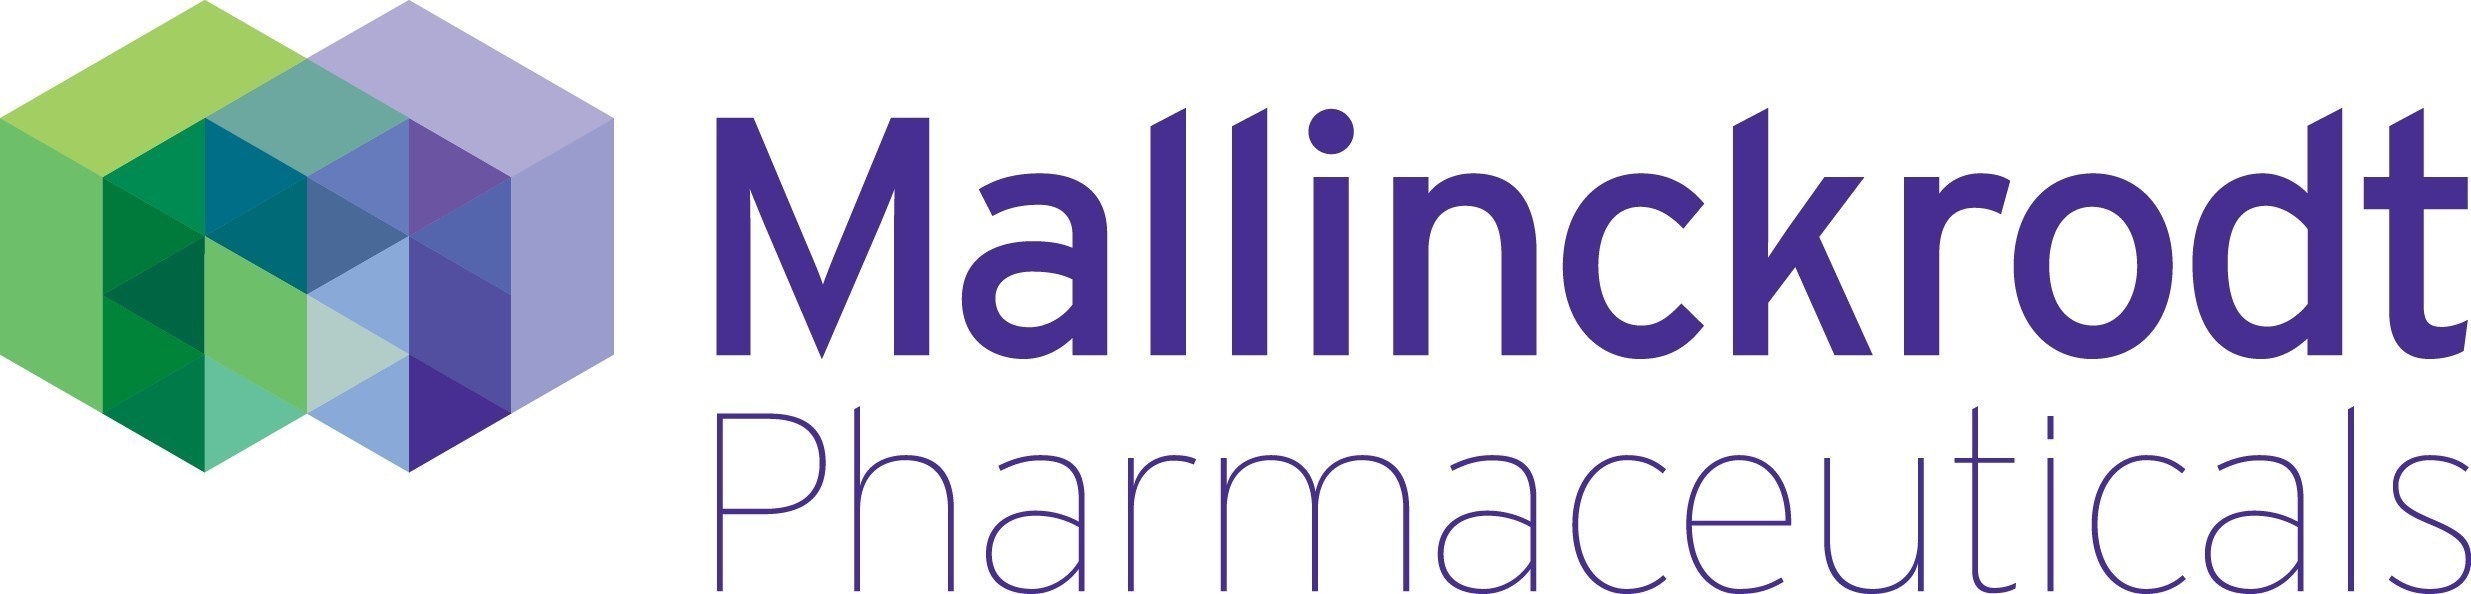 Mallinckrodt Presents Positive Phase 3 Results from its CONFIRM Study of Terlipressin in Patients with Hepatorenal Syndrome Type 1 (HRS-1) at The Liver Meeting® 2019